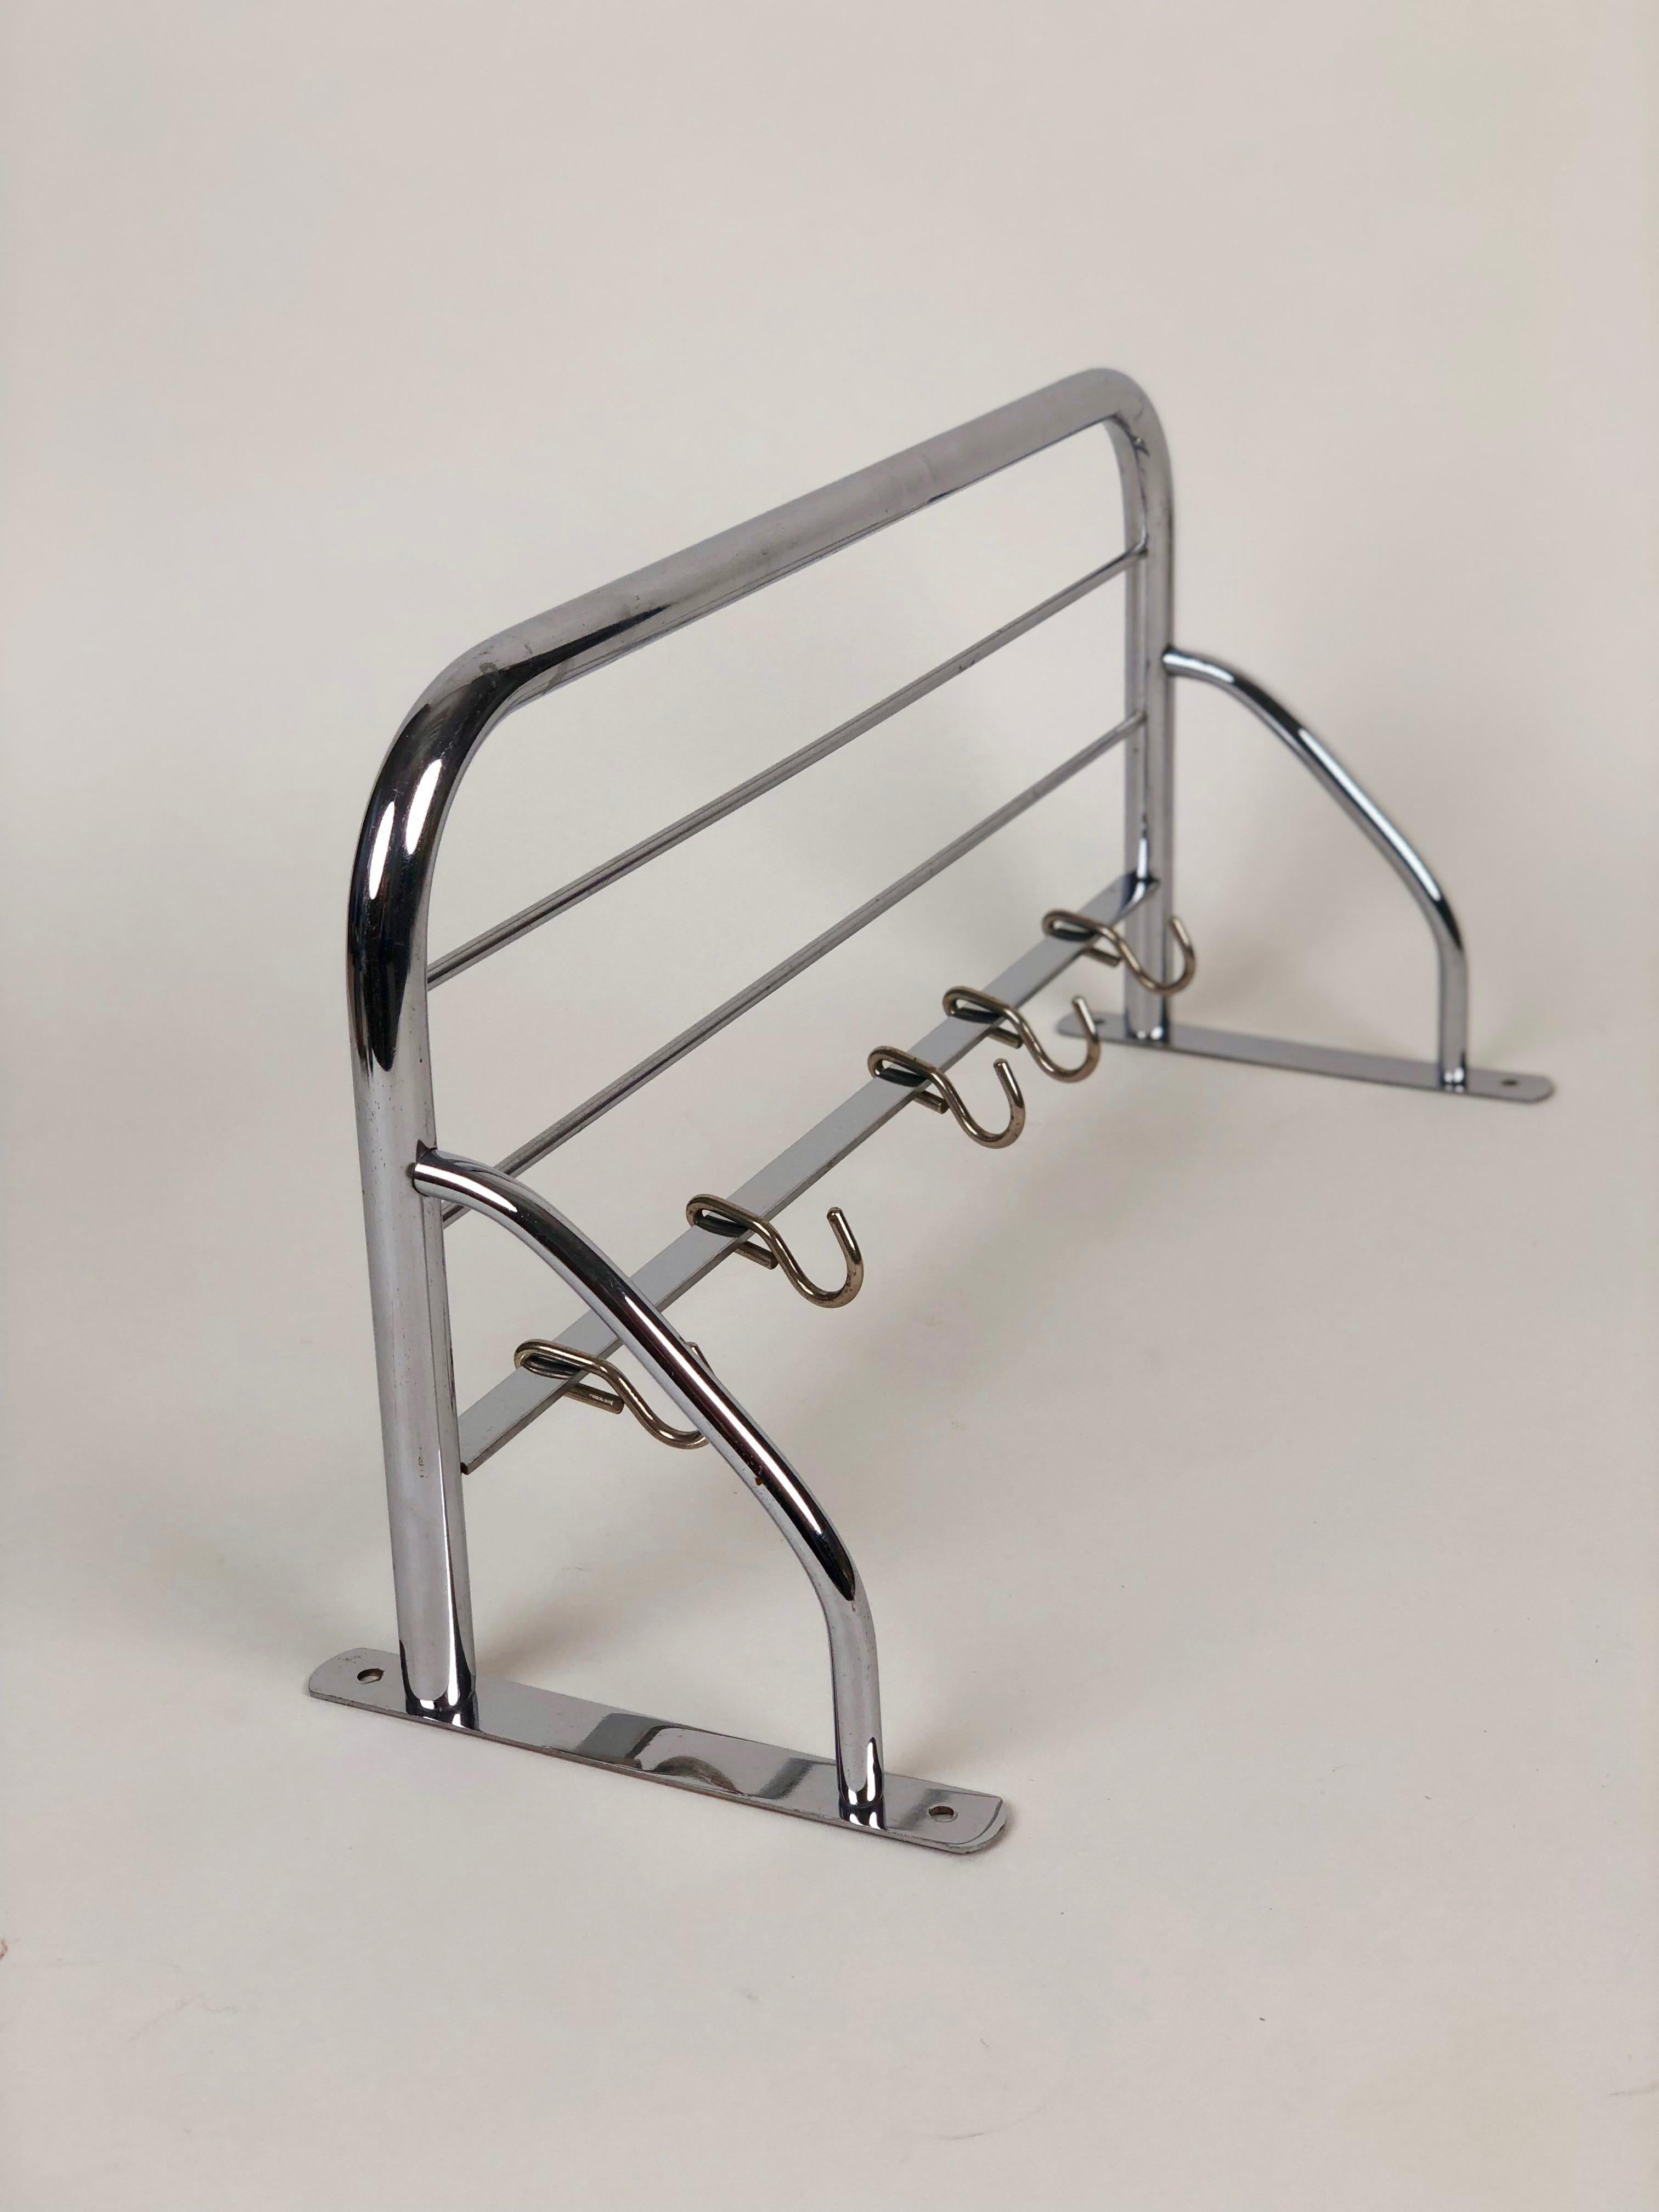 Chrome-plated coat rack from the Czechoslovakia made in the design style of the Bauhaus. Produced in the 1960s.
Bent metal form, chrome-plated, with 5 hooks, in very good condition.